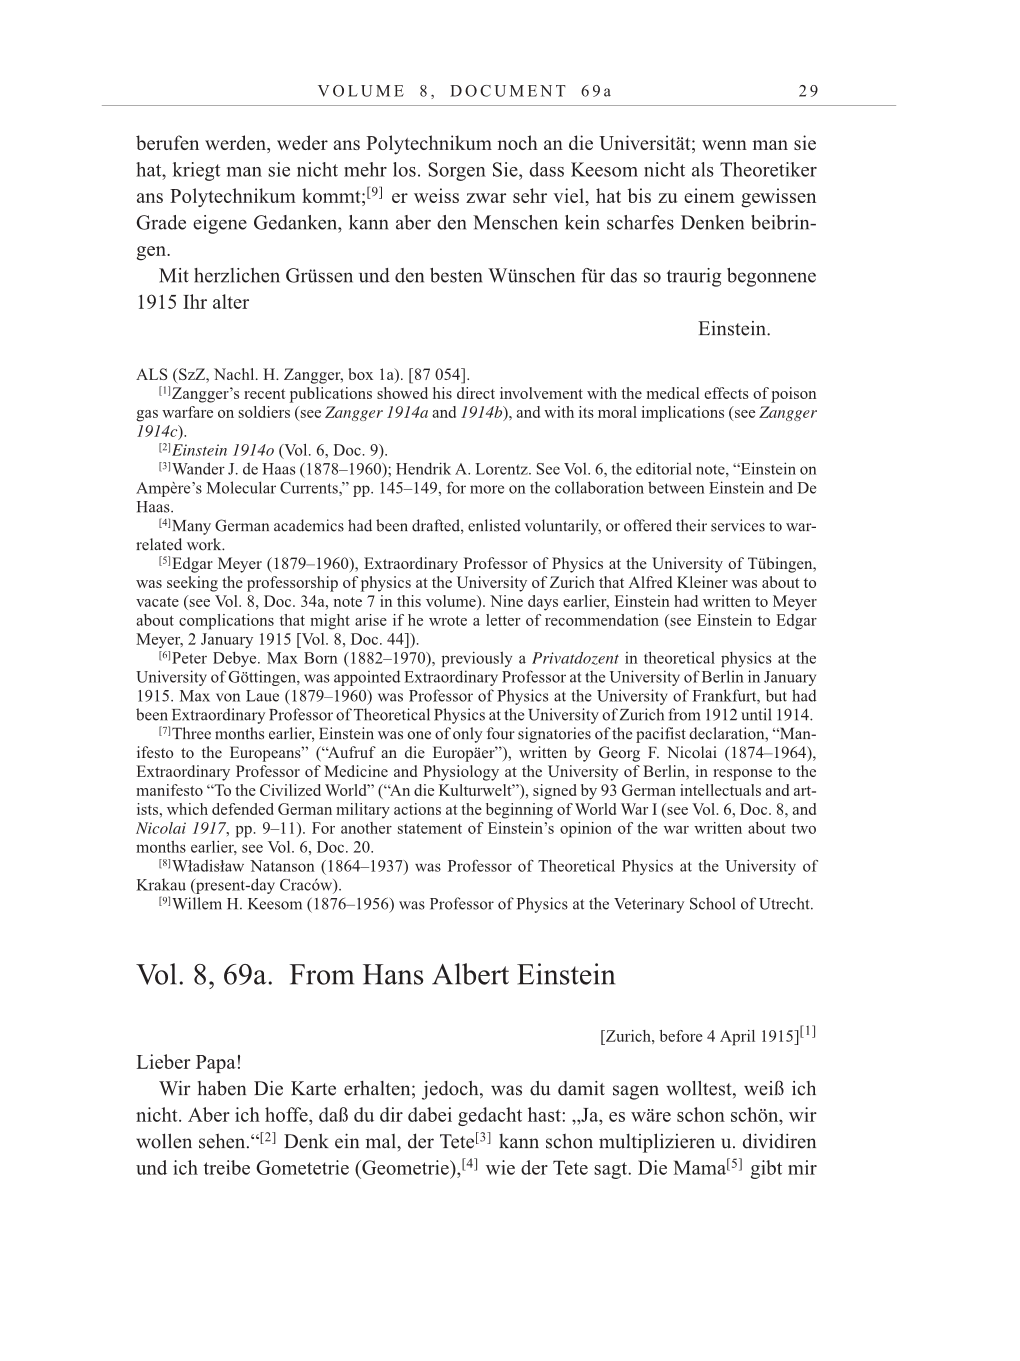 Volume 10: The Berlin Years: Correspondence May-December 1920 / Supplementary Correspondence 1909-1920 page 29